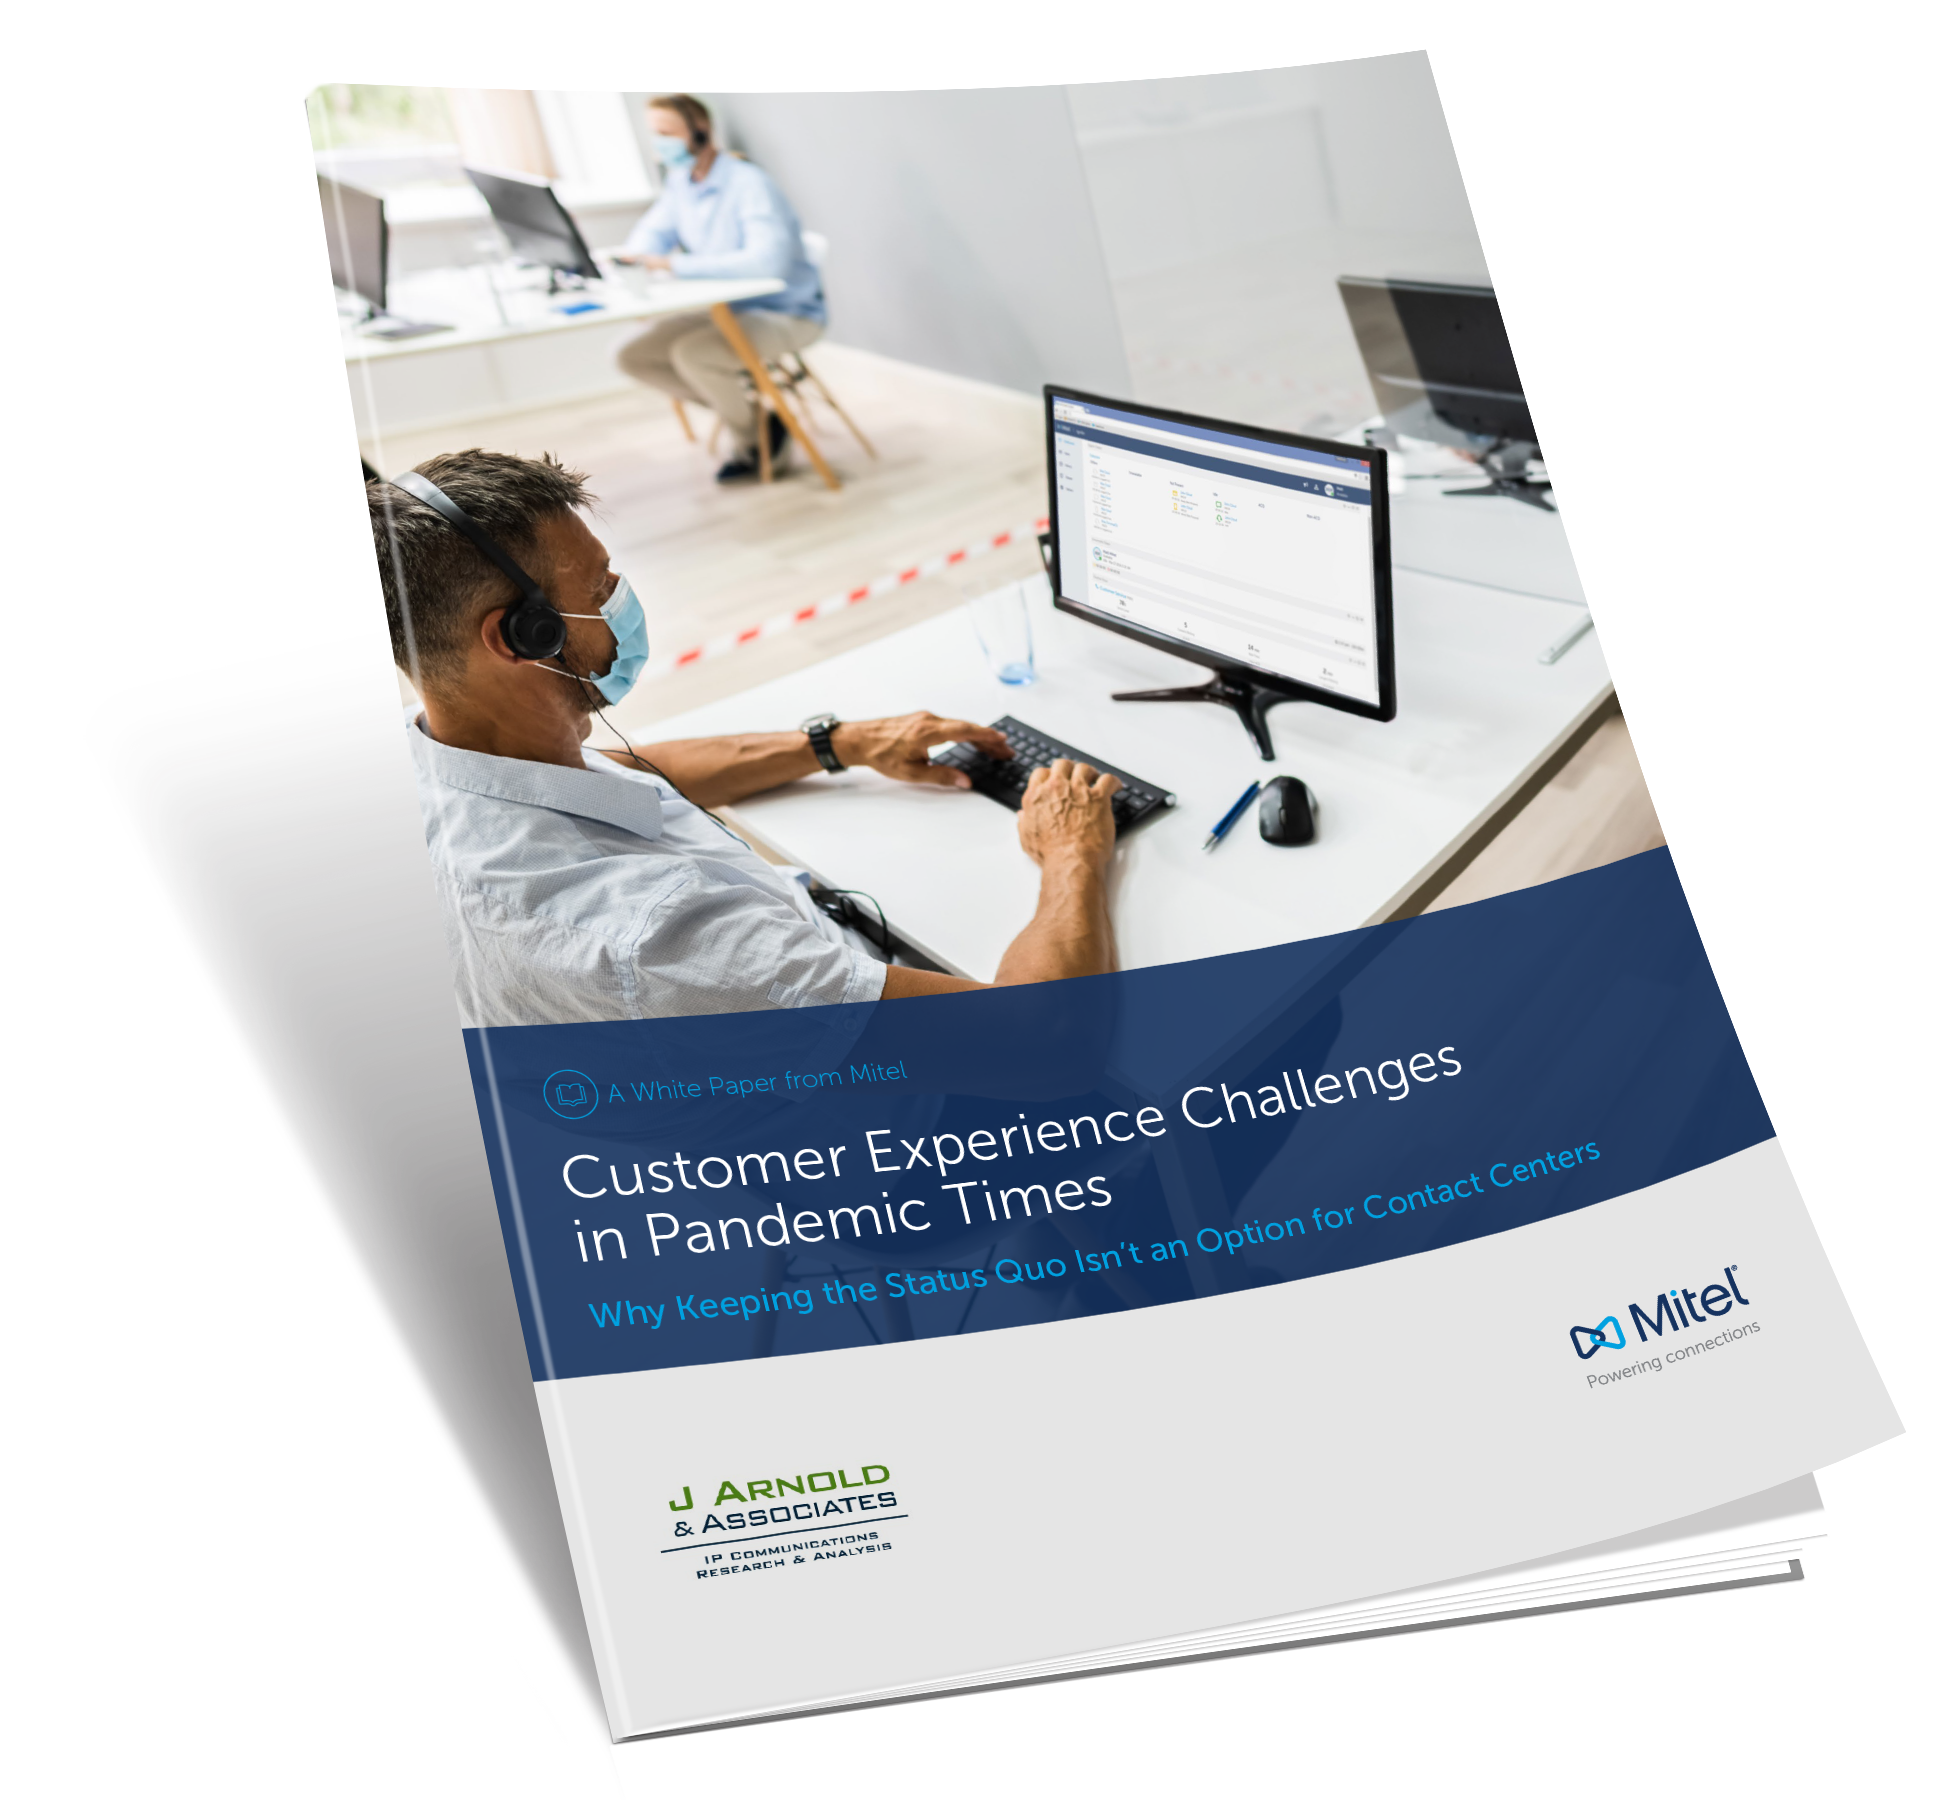 CX white paper_Customer-experience-3D-Image.png